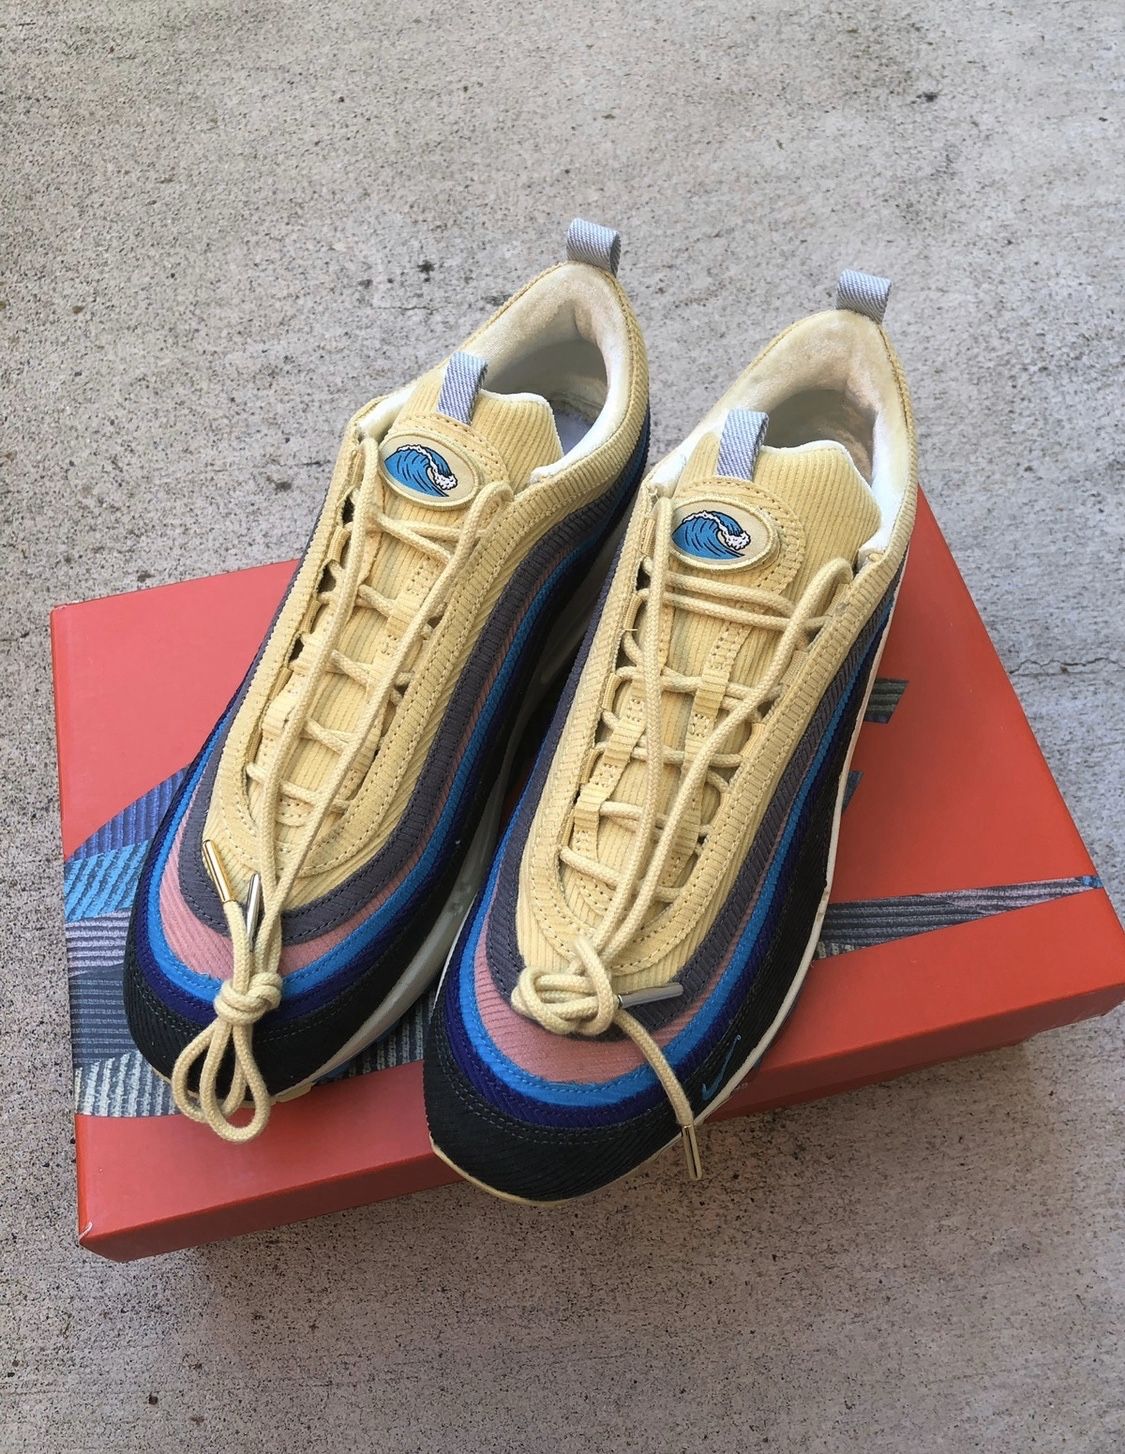 Nike air max 1/97 Sean wotherspoon size 9